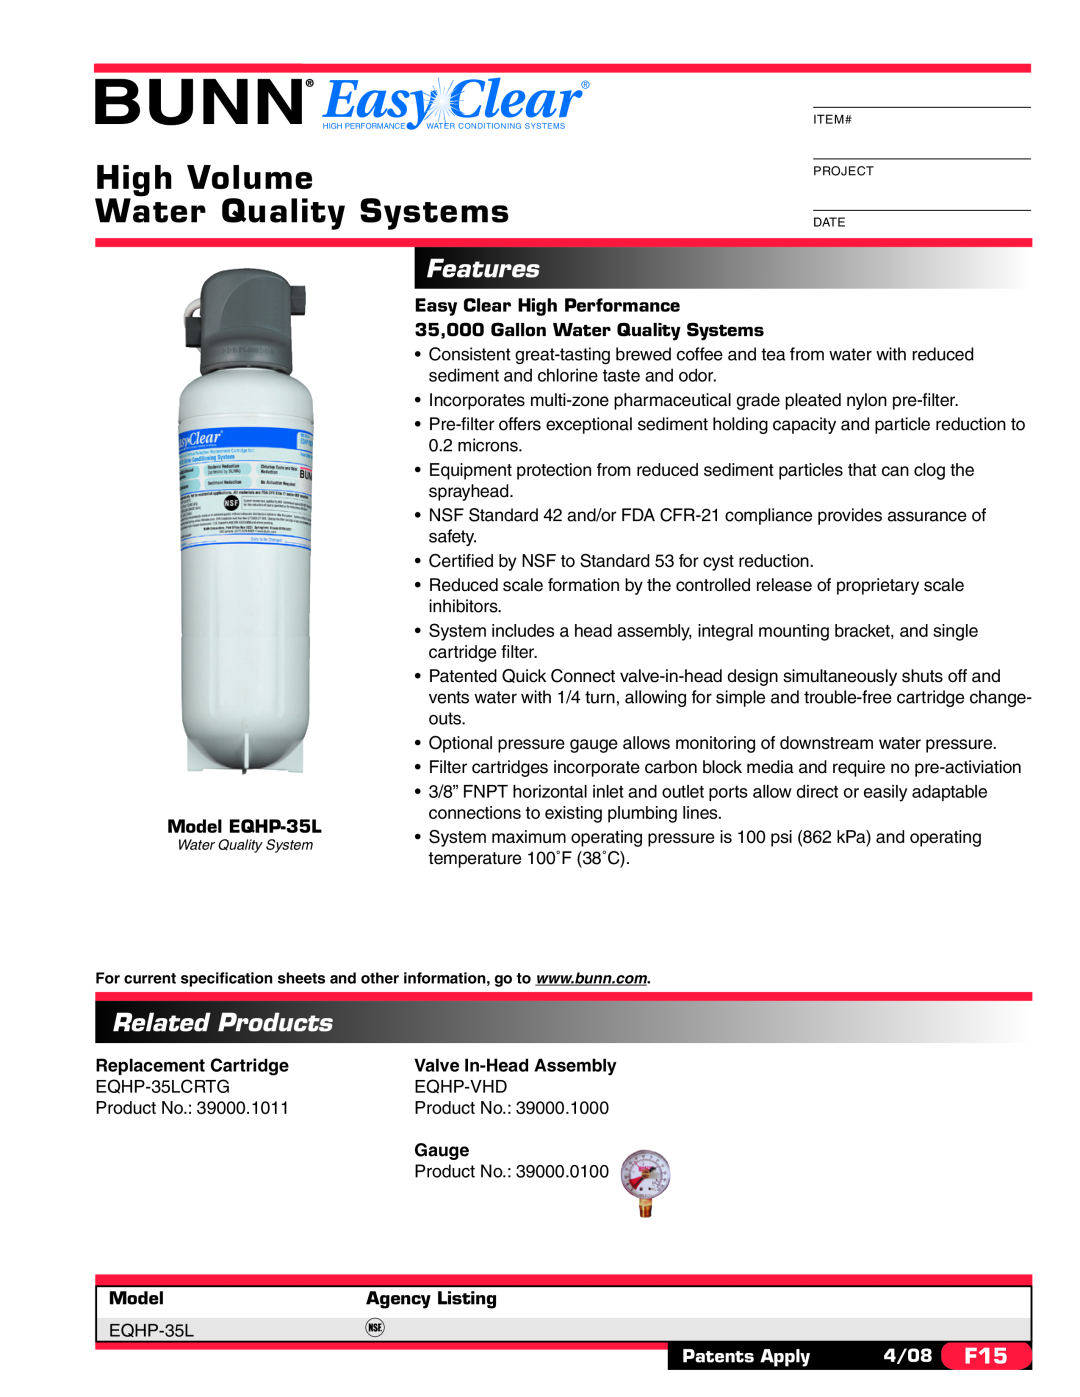 Bunn EQHP-35L specifications High Volume, Water Quality Systems, Features, Related Products, Patents Apply, 4/08 F15 